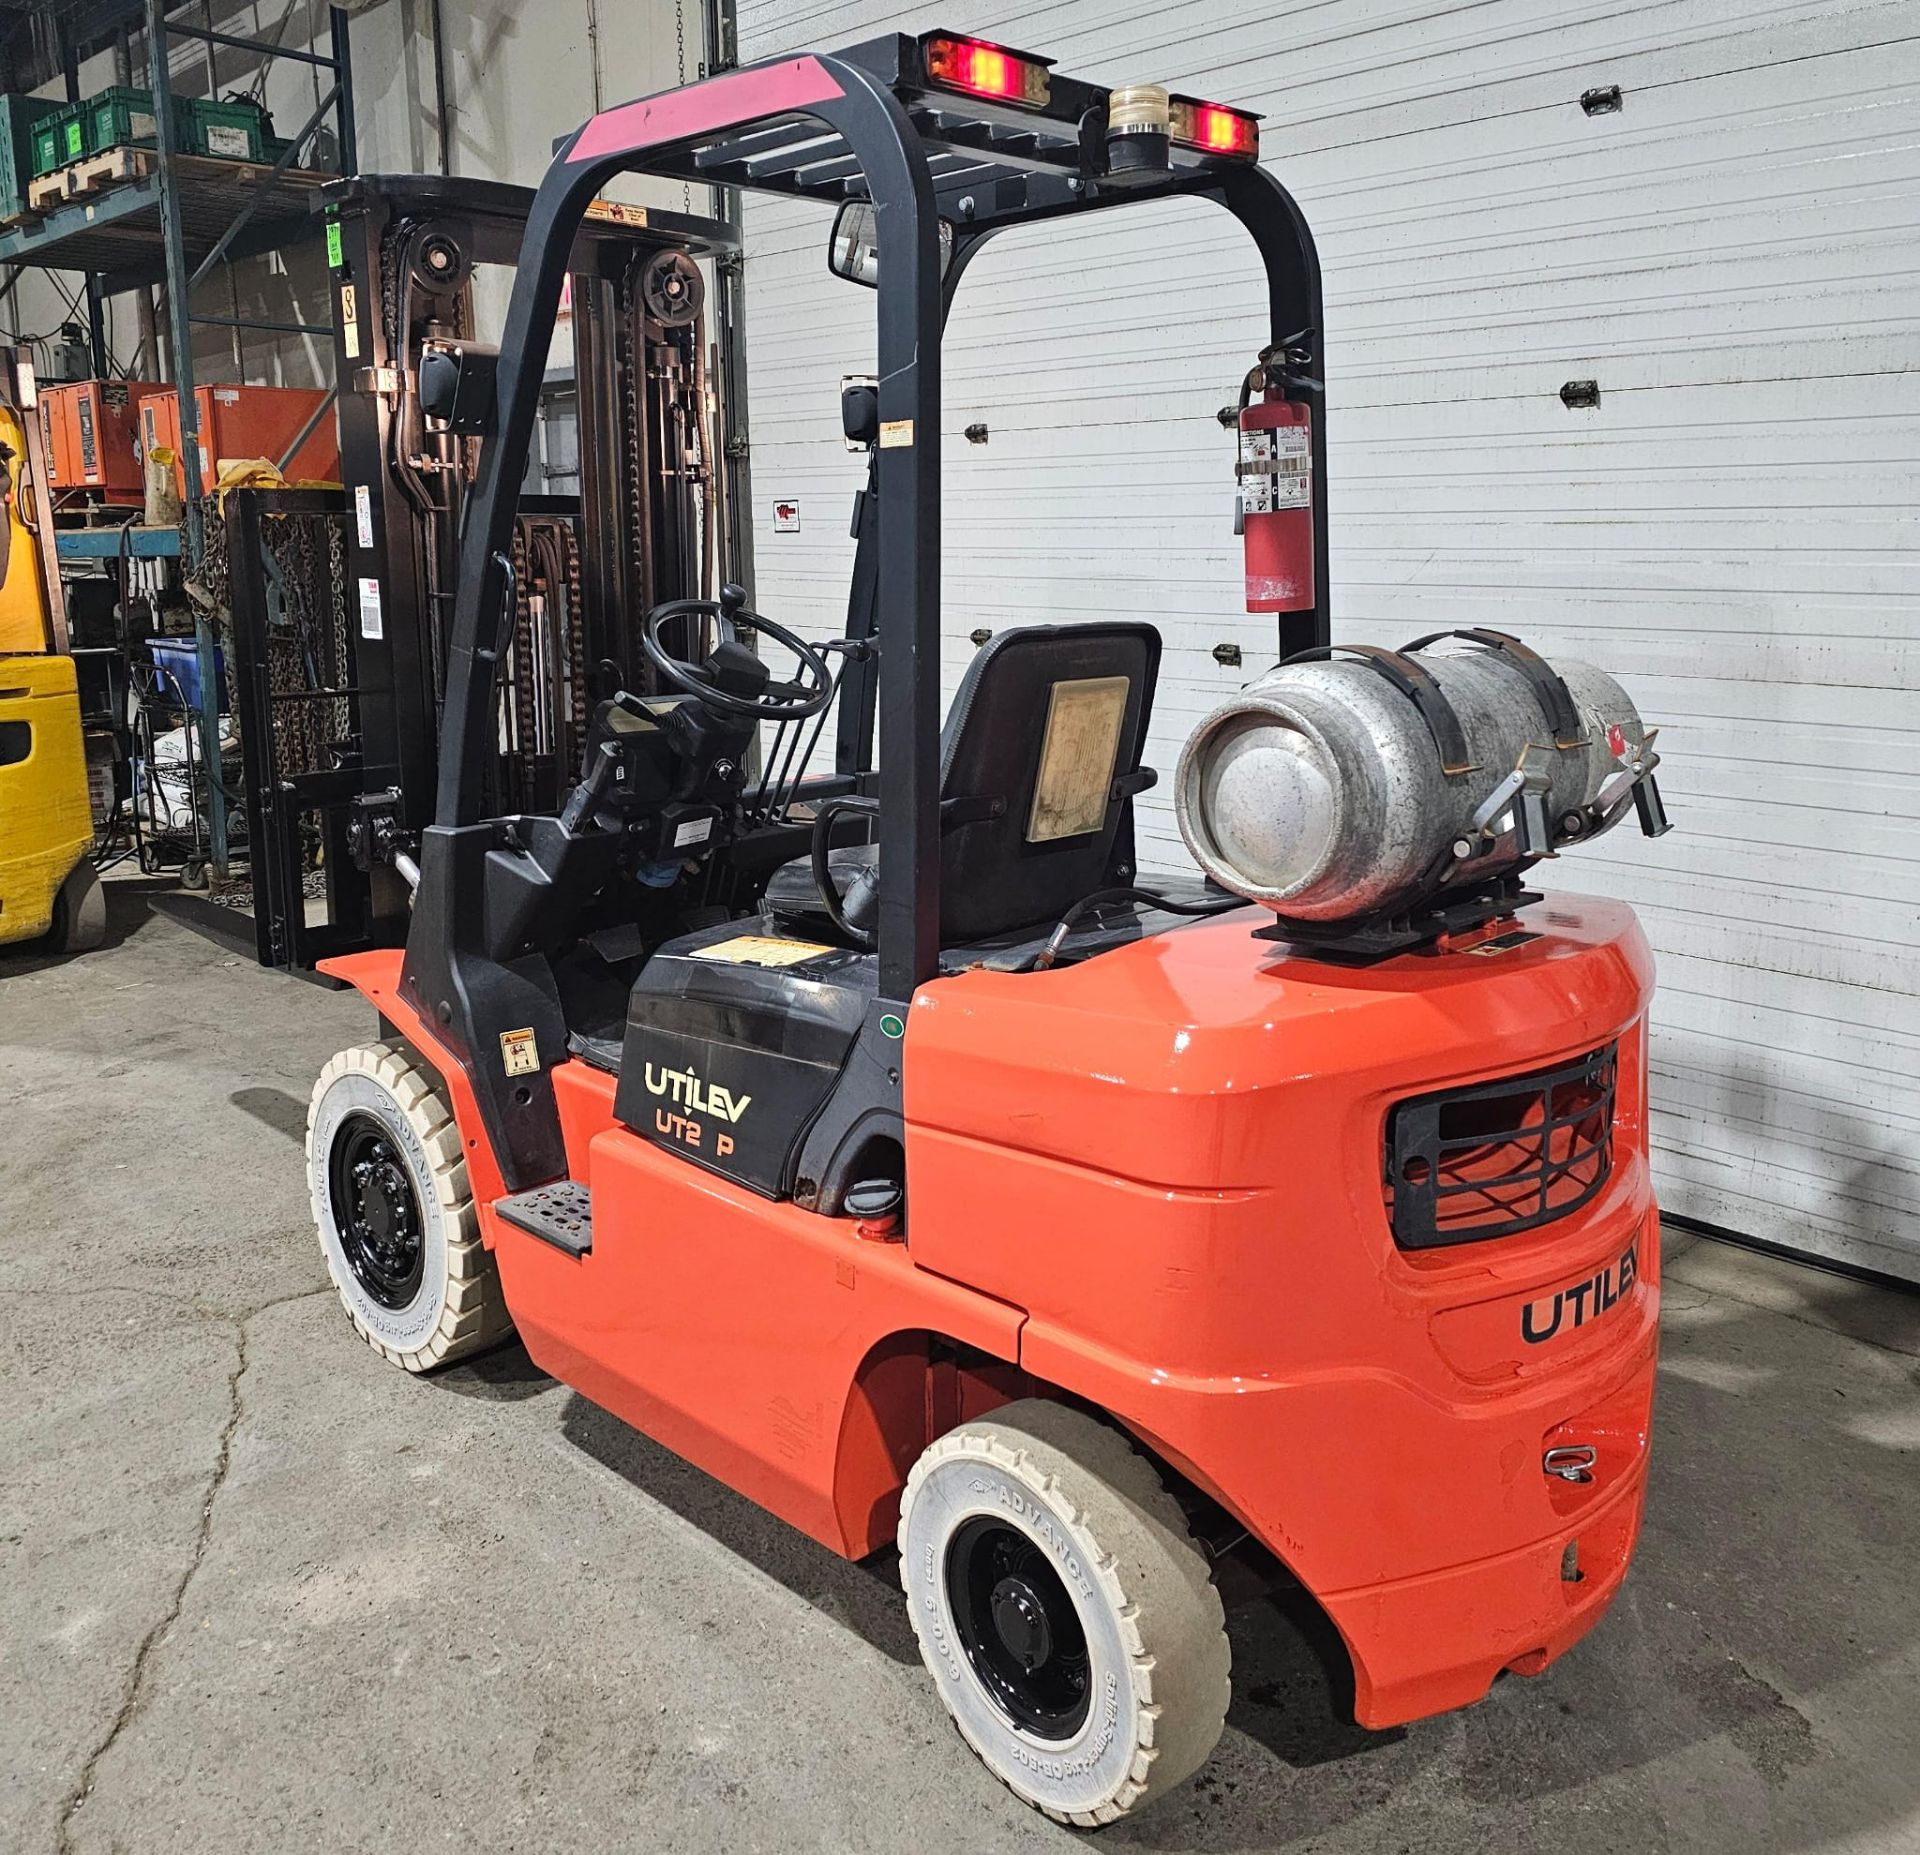 2016 Utilev 5,000lbs Capacity LPG (Propane) OUTDOOR Forklift with sideshift & 3-STAGE MAST & tires - Image 2 of 6